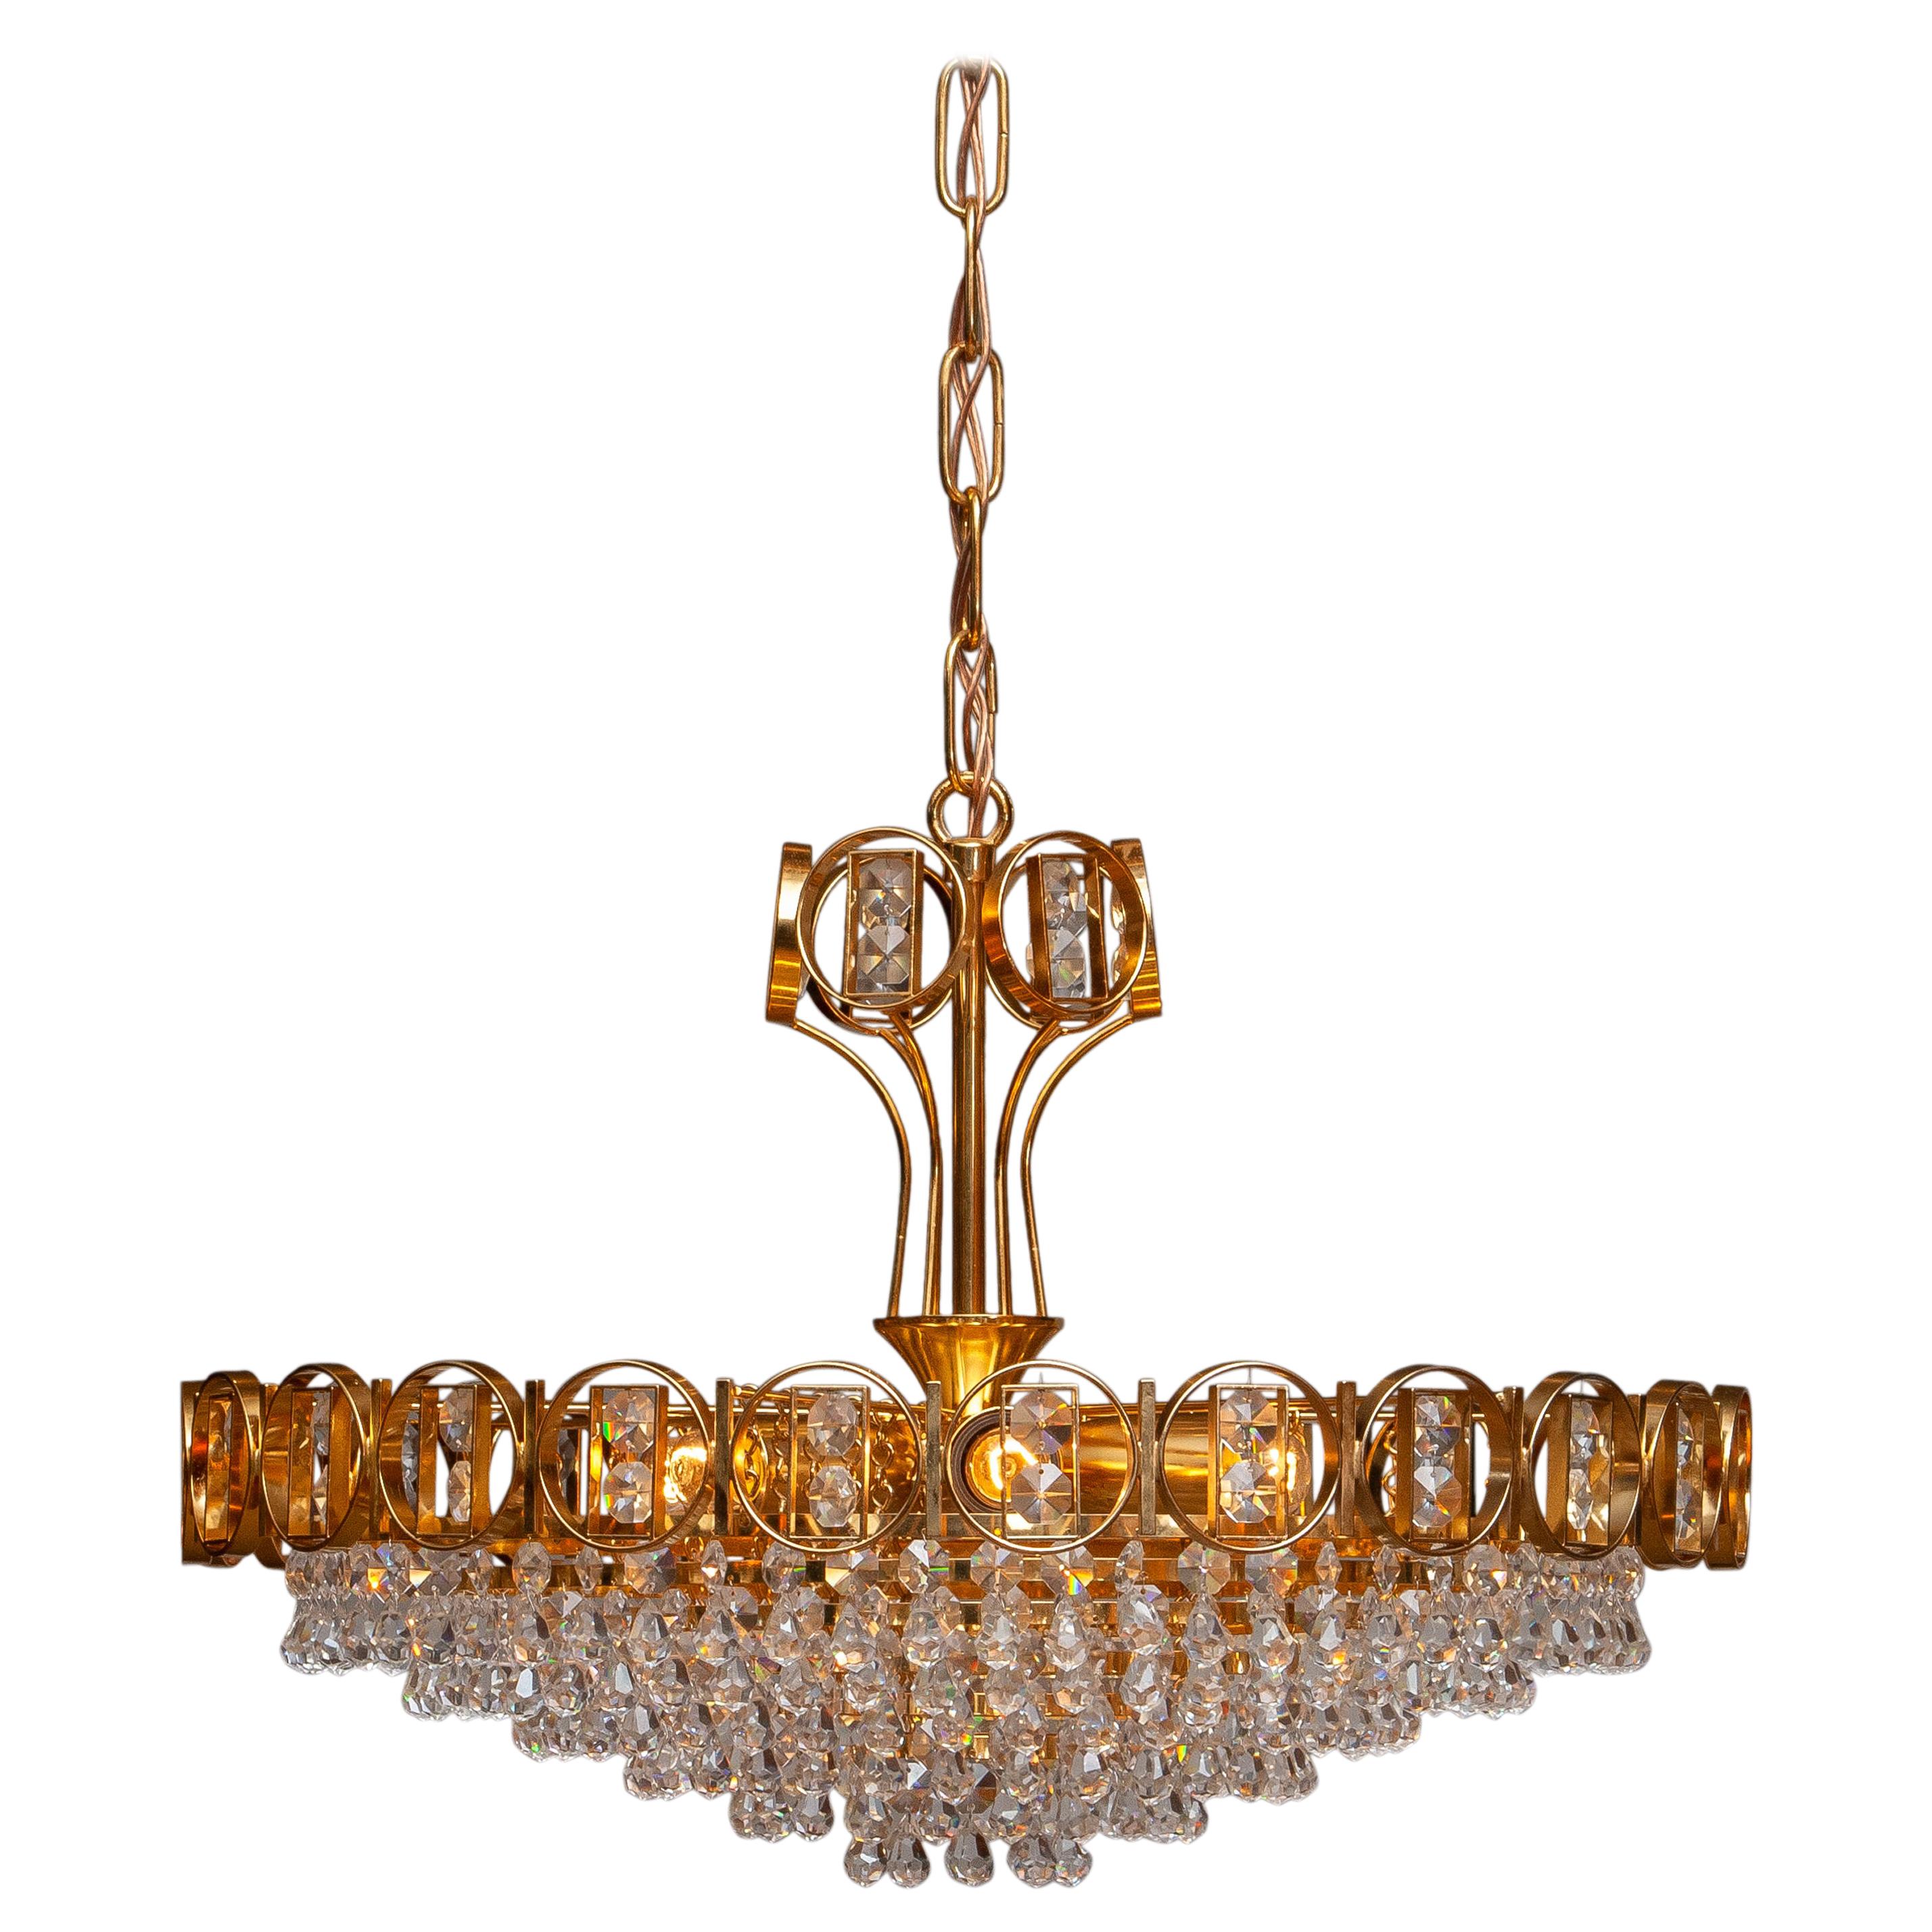 Beautiful brass gilded chandelier filed with faceted crystals made by Palwa, Germany, 1970.
This chandelier consist out of a gold plated crown with inside six gold plaited rings filed with crystals and on top also a smaller gold plaited